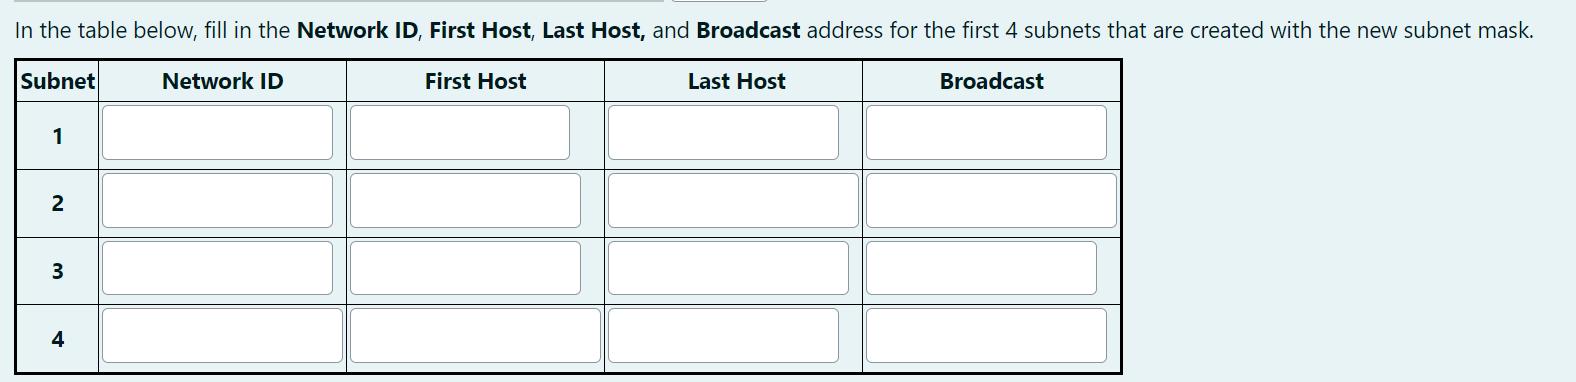 In the table below, fill in the Network ID, First Host, Last Host, and Broadcast address for the first 4